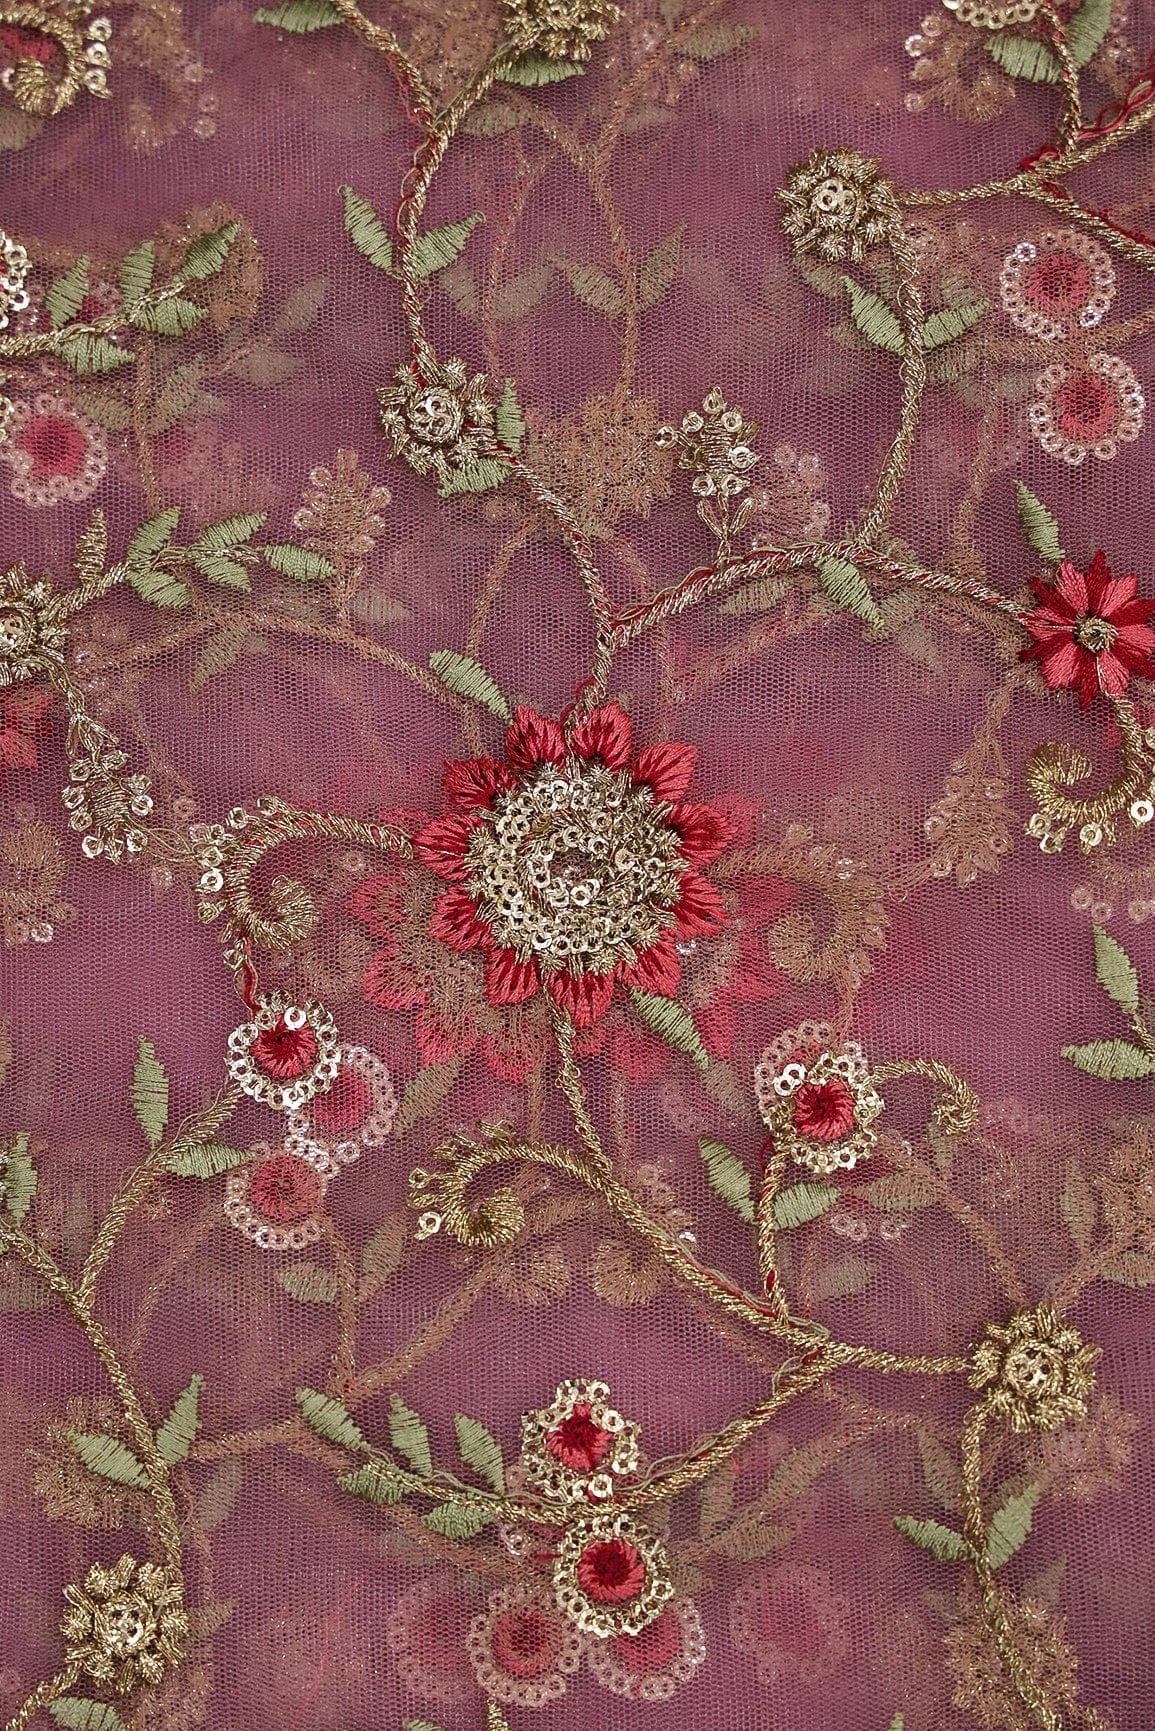 doeraa Embroidery Fabrics 1 Meter Cut Piece Of Gold Sequins With Gold Zari Floral Thread Embroidery On Pink Soft Net Fabric